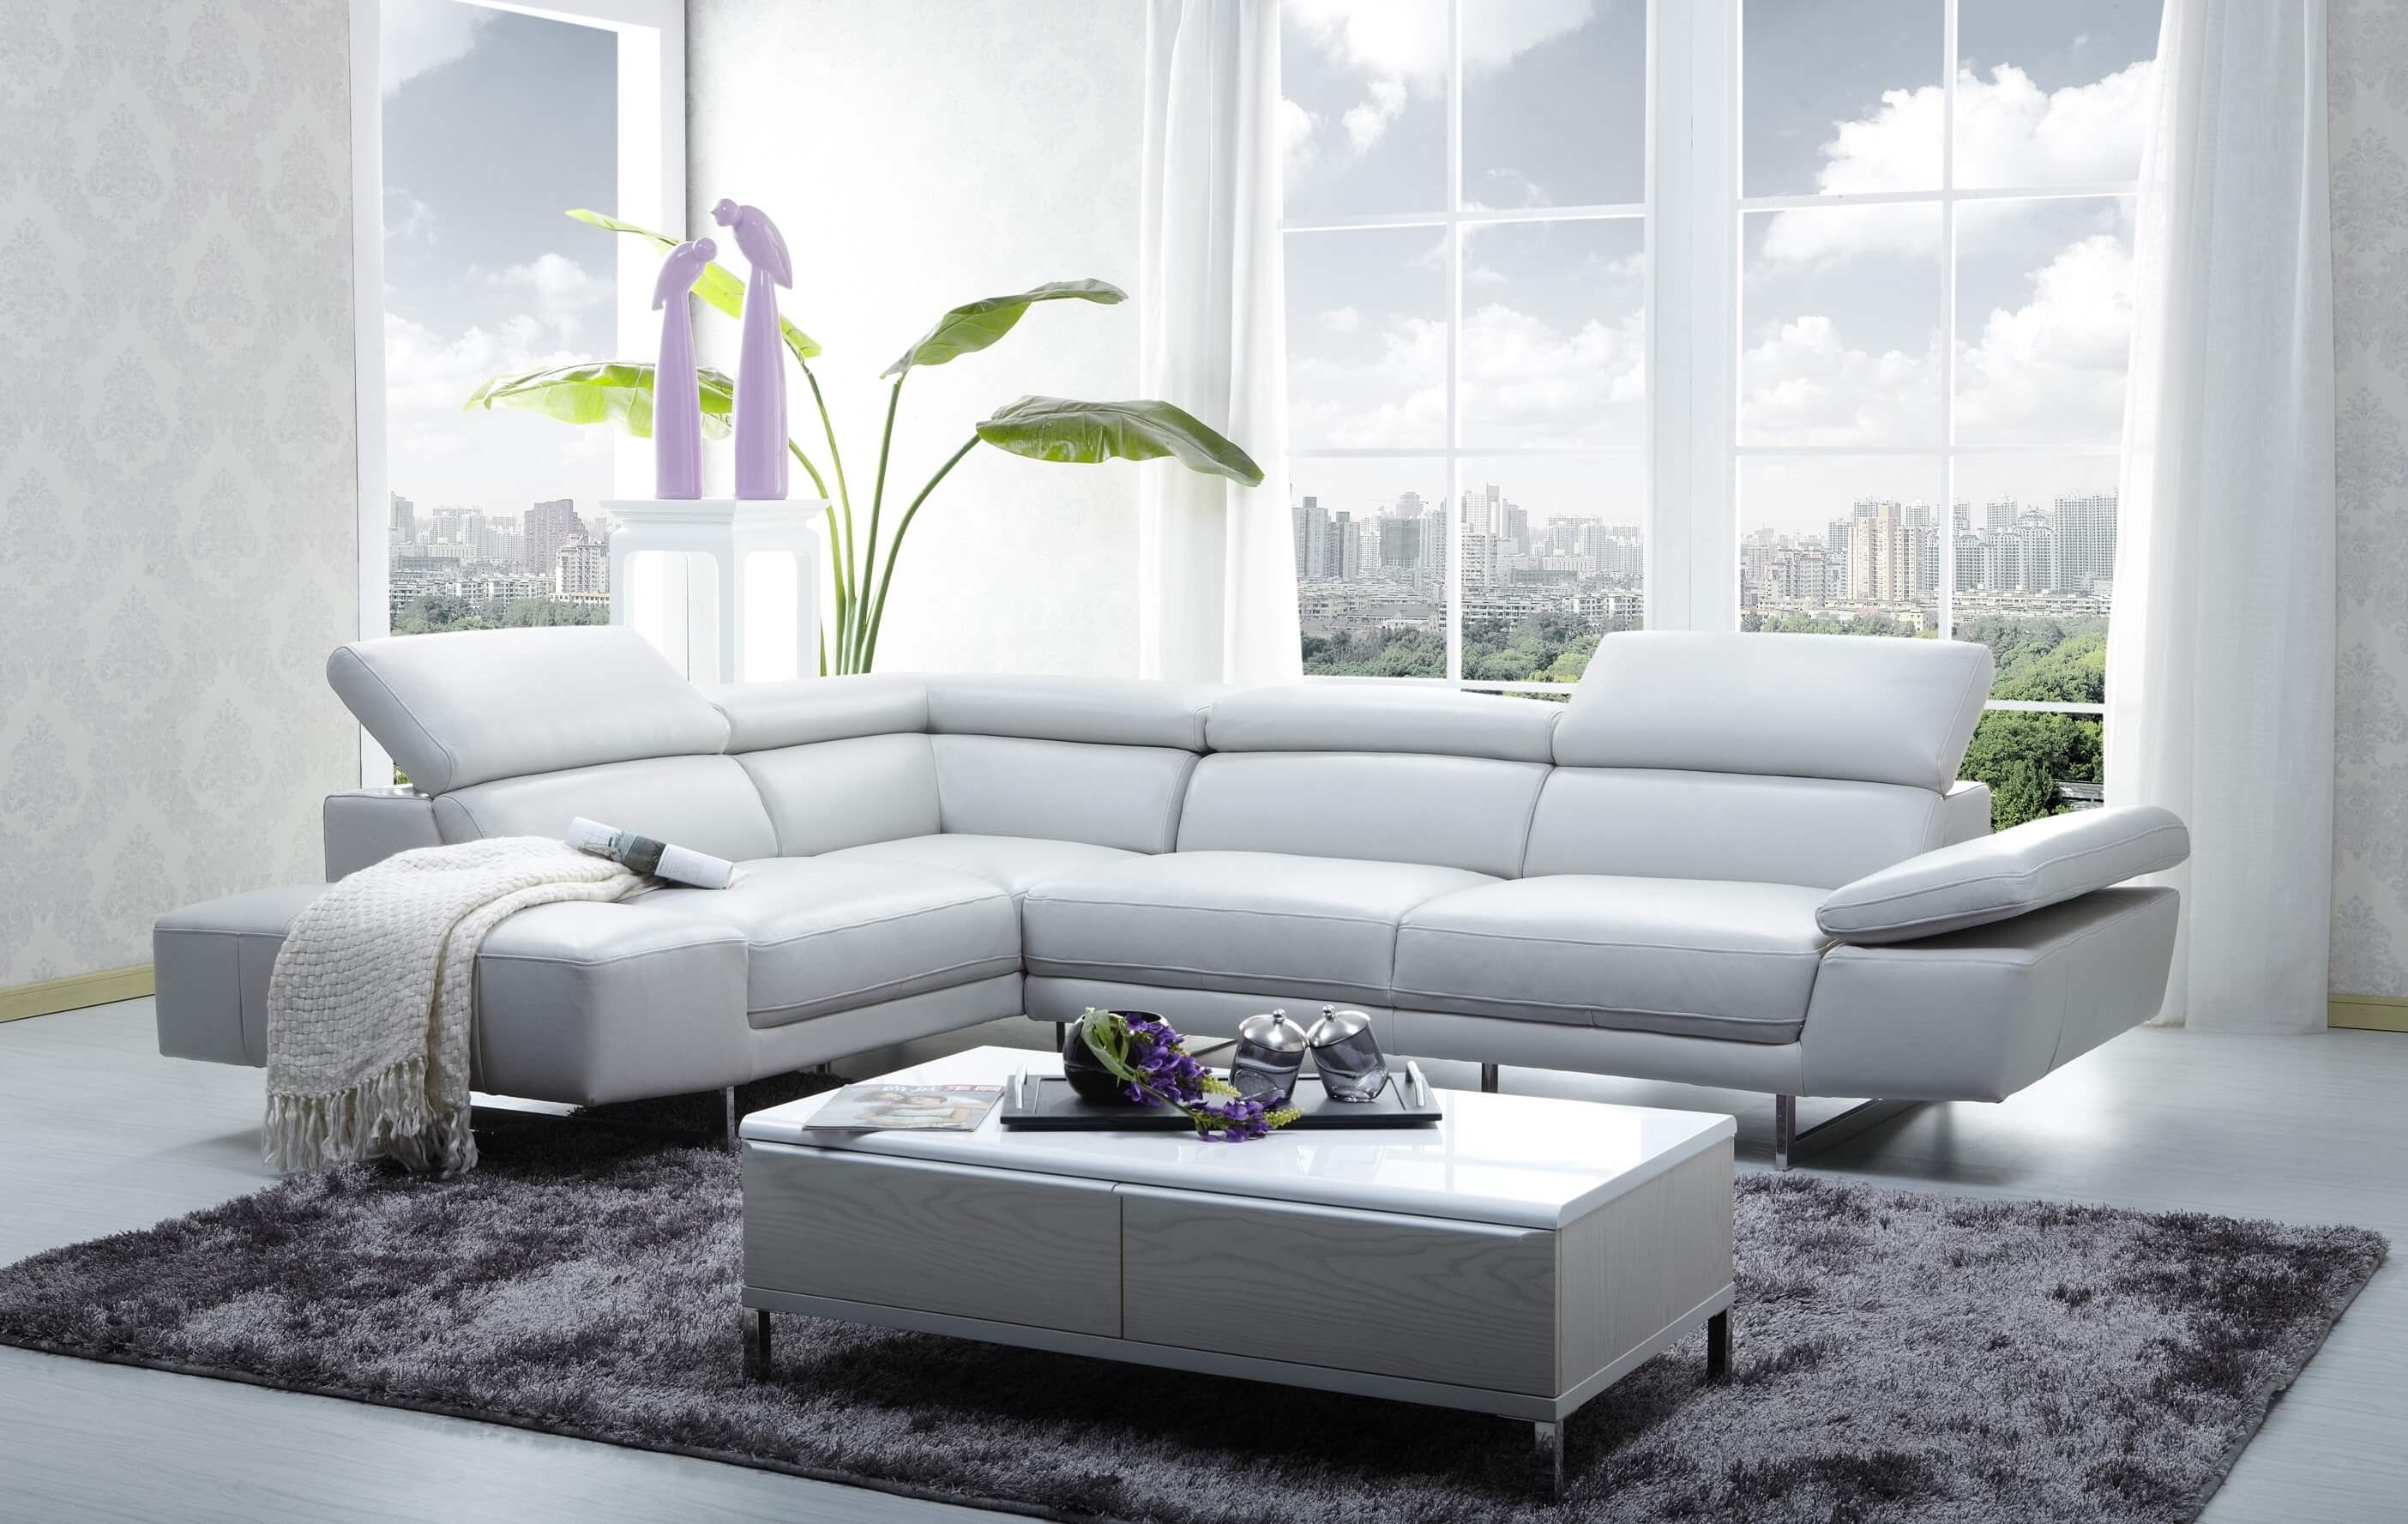 22 Couch Designs For Living Room That Known For Its Best Comfort